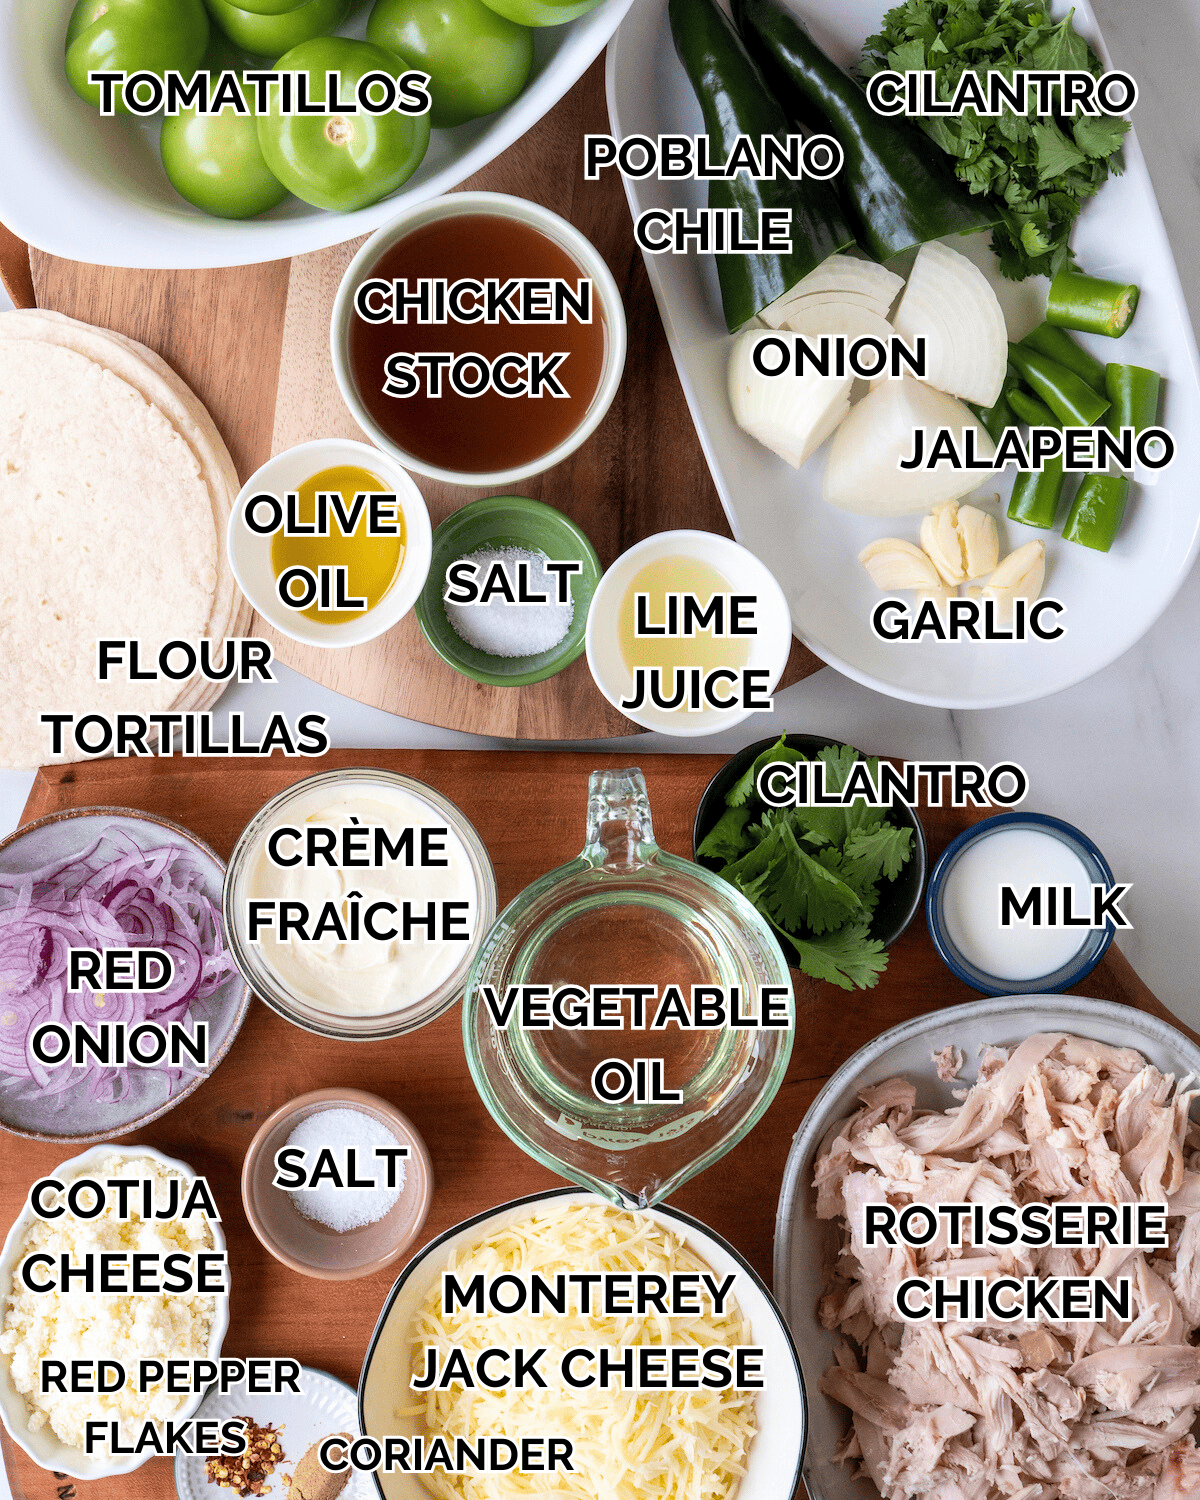 A shot of all the ingredients in this dish sitting in individual vessels. Ingredients include the following: Tomatillos, poblano chile, cilantro, onion, jalapenos, garlic, chicken stock, olive oil, salt, lime juice, flour tortillas, creme fraiche, red onions, vegetable oil, milk, salt, cotija, red pepper flakes, coriander, monterey jack cheese, and rotisserie chicken.